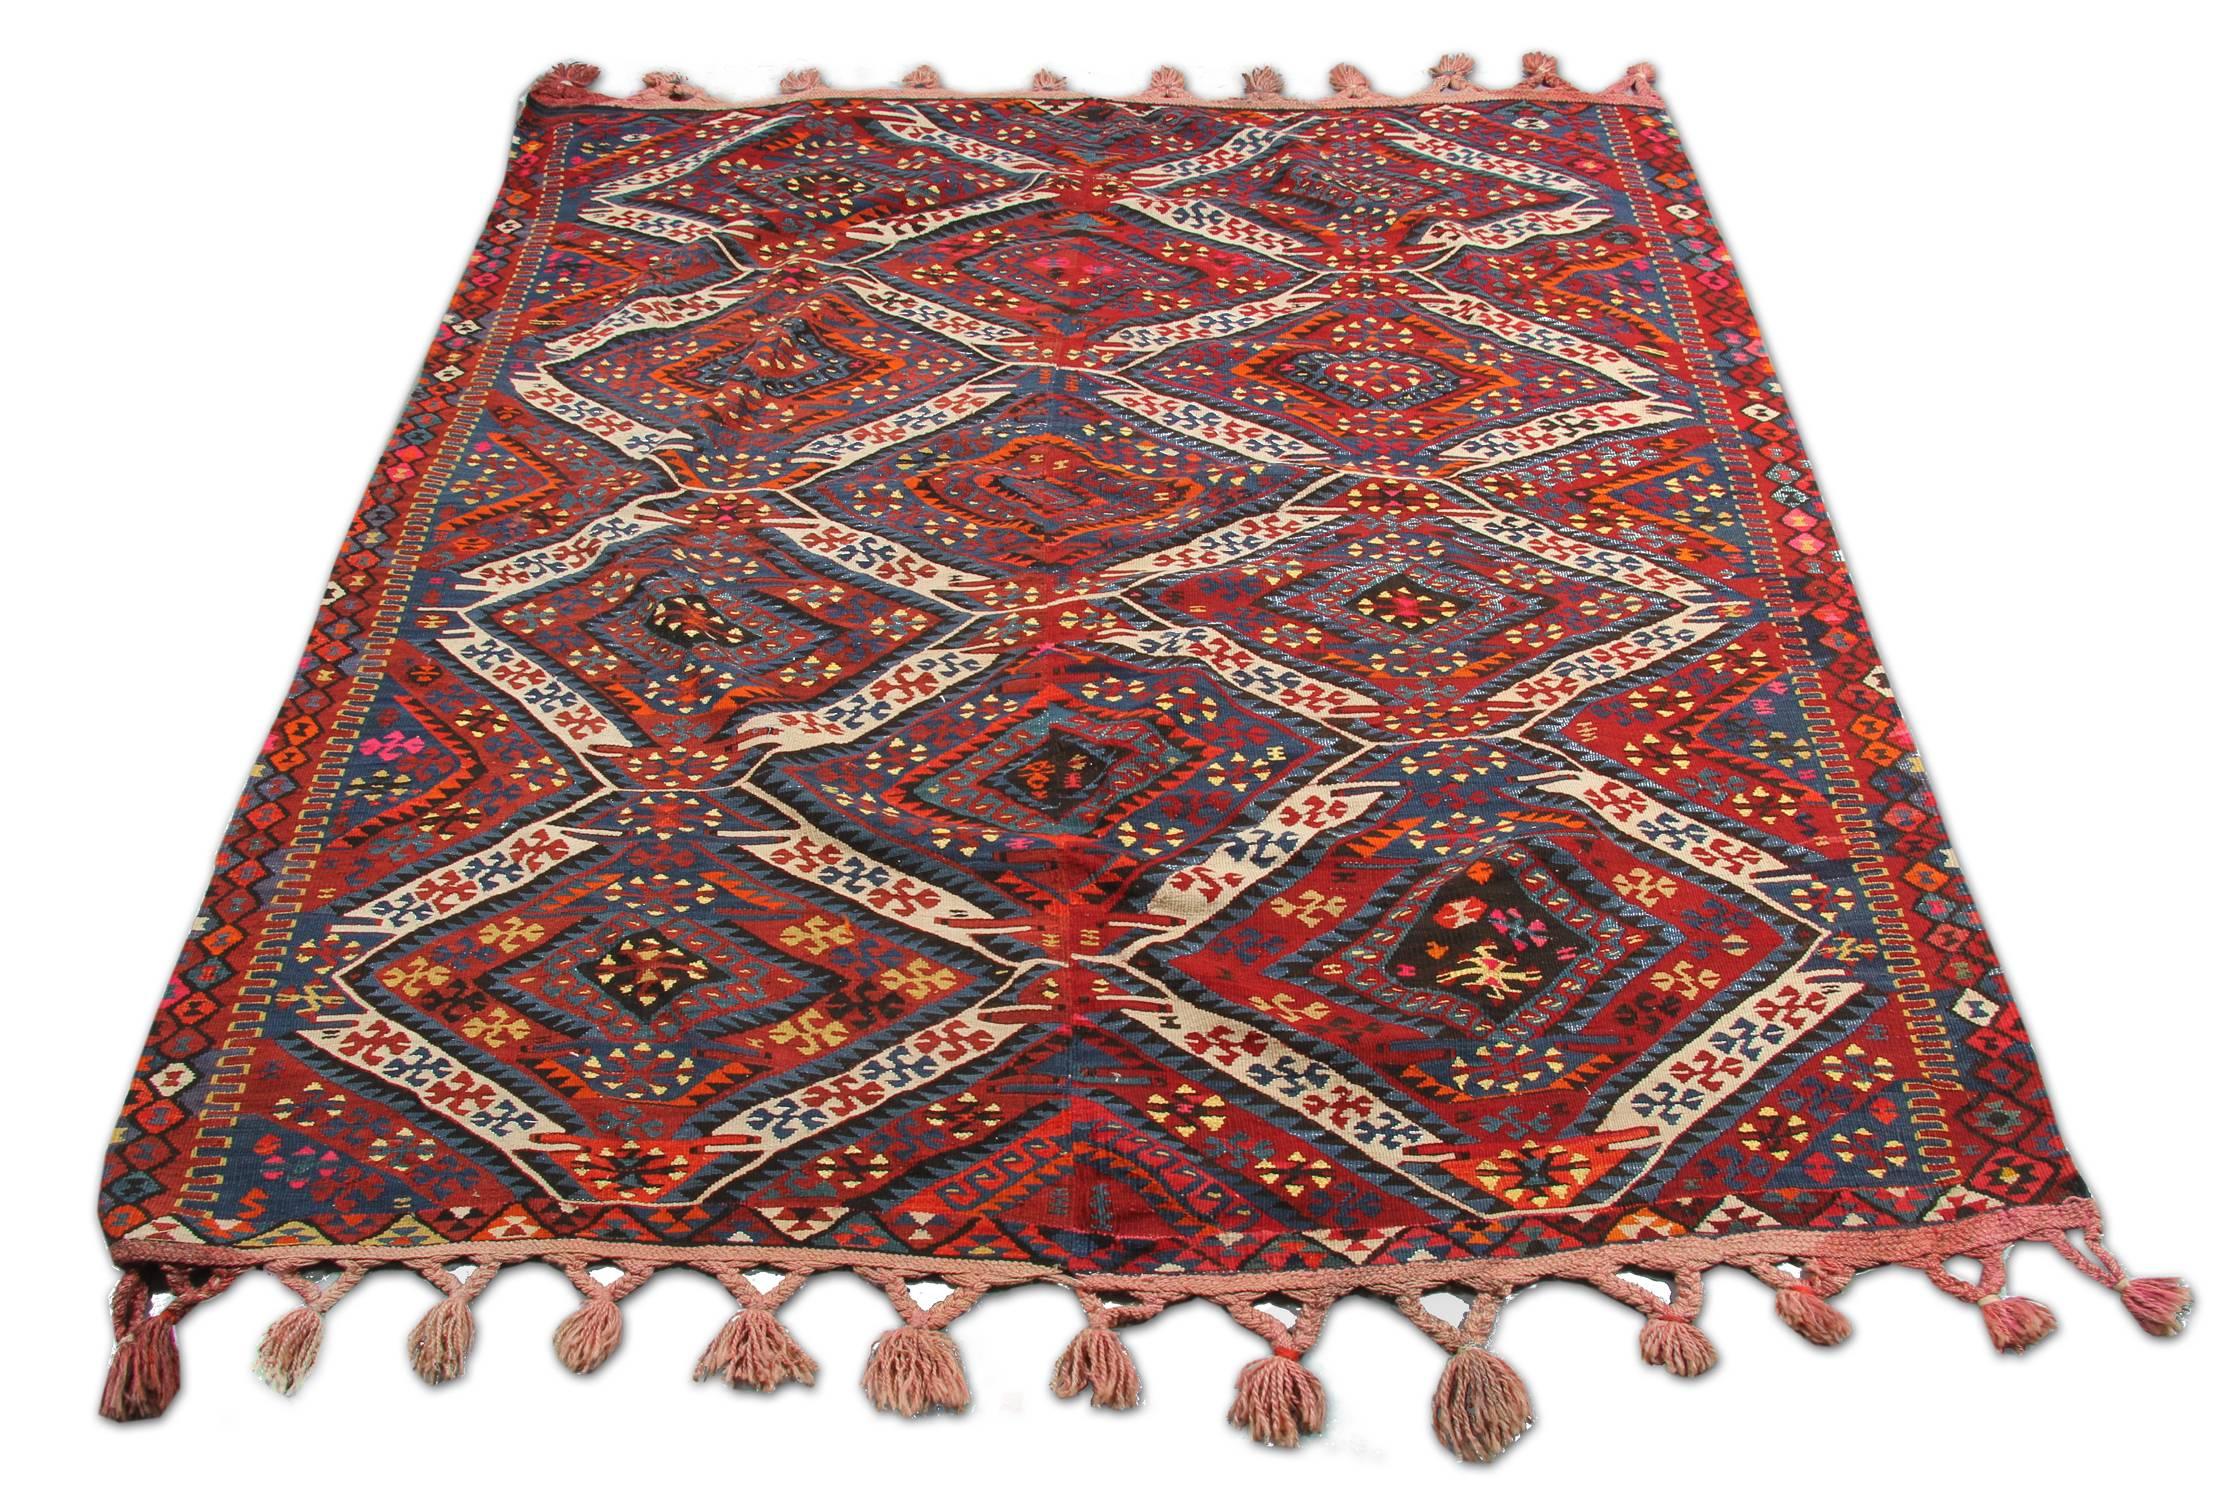 Very nice hand-woven Antique Turkish kilim rugs, it has the very nice colour combination and has some metal spun wool on it, this kilim rug comes from Anatolia in 19 century and it is a very good match with traditional decoration as well. this